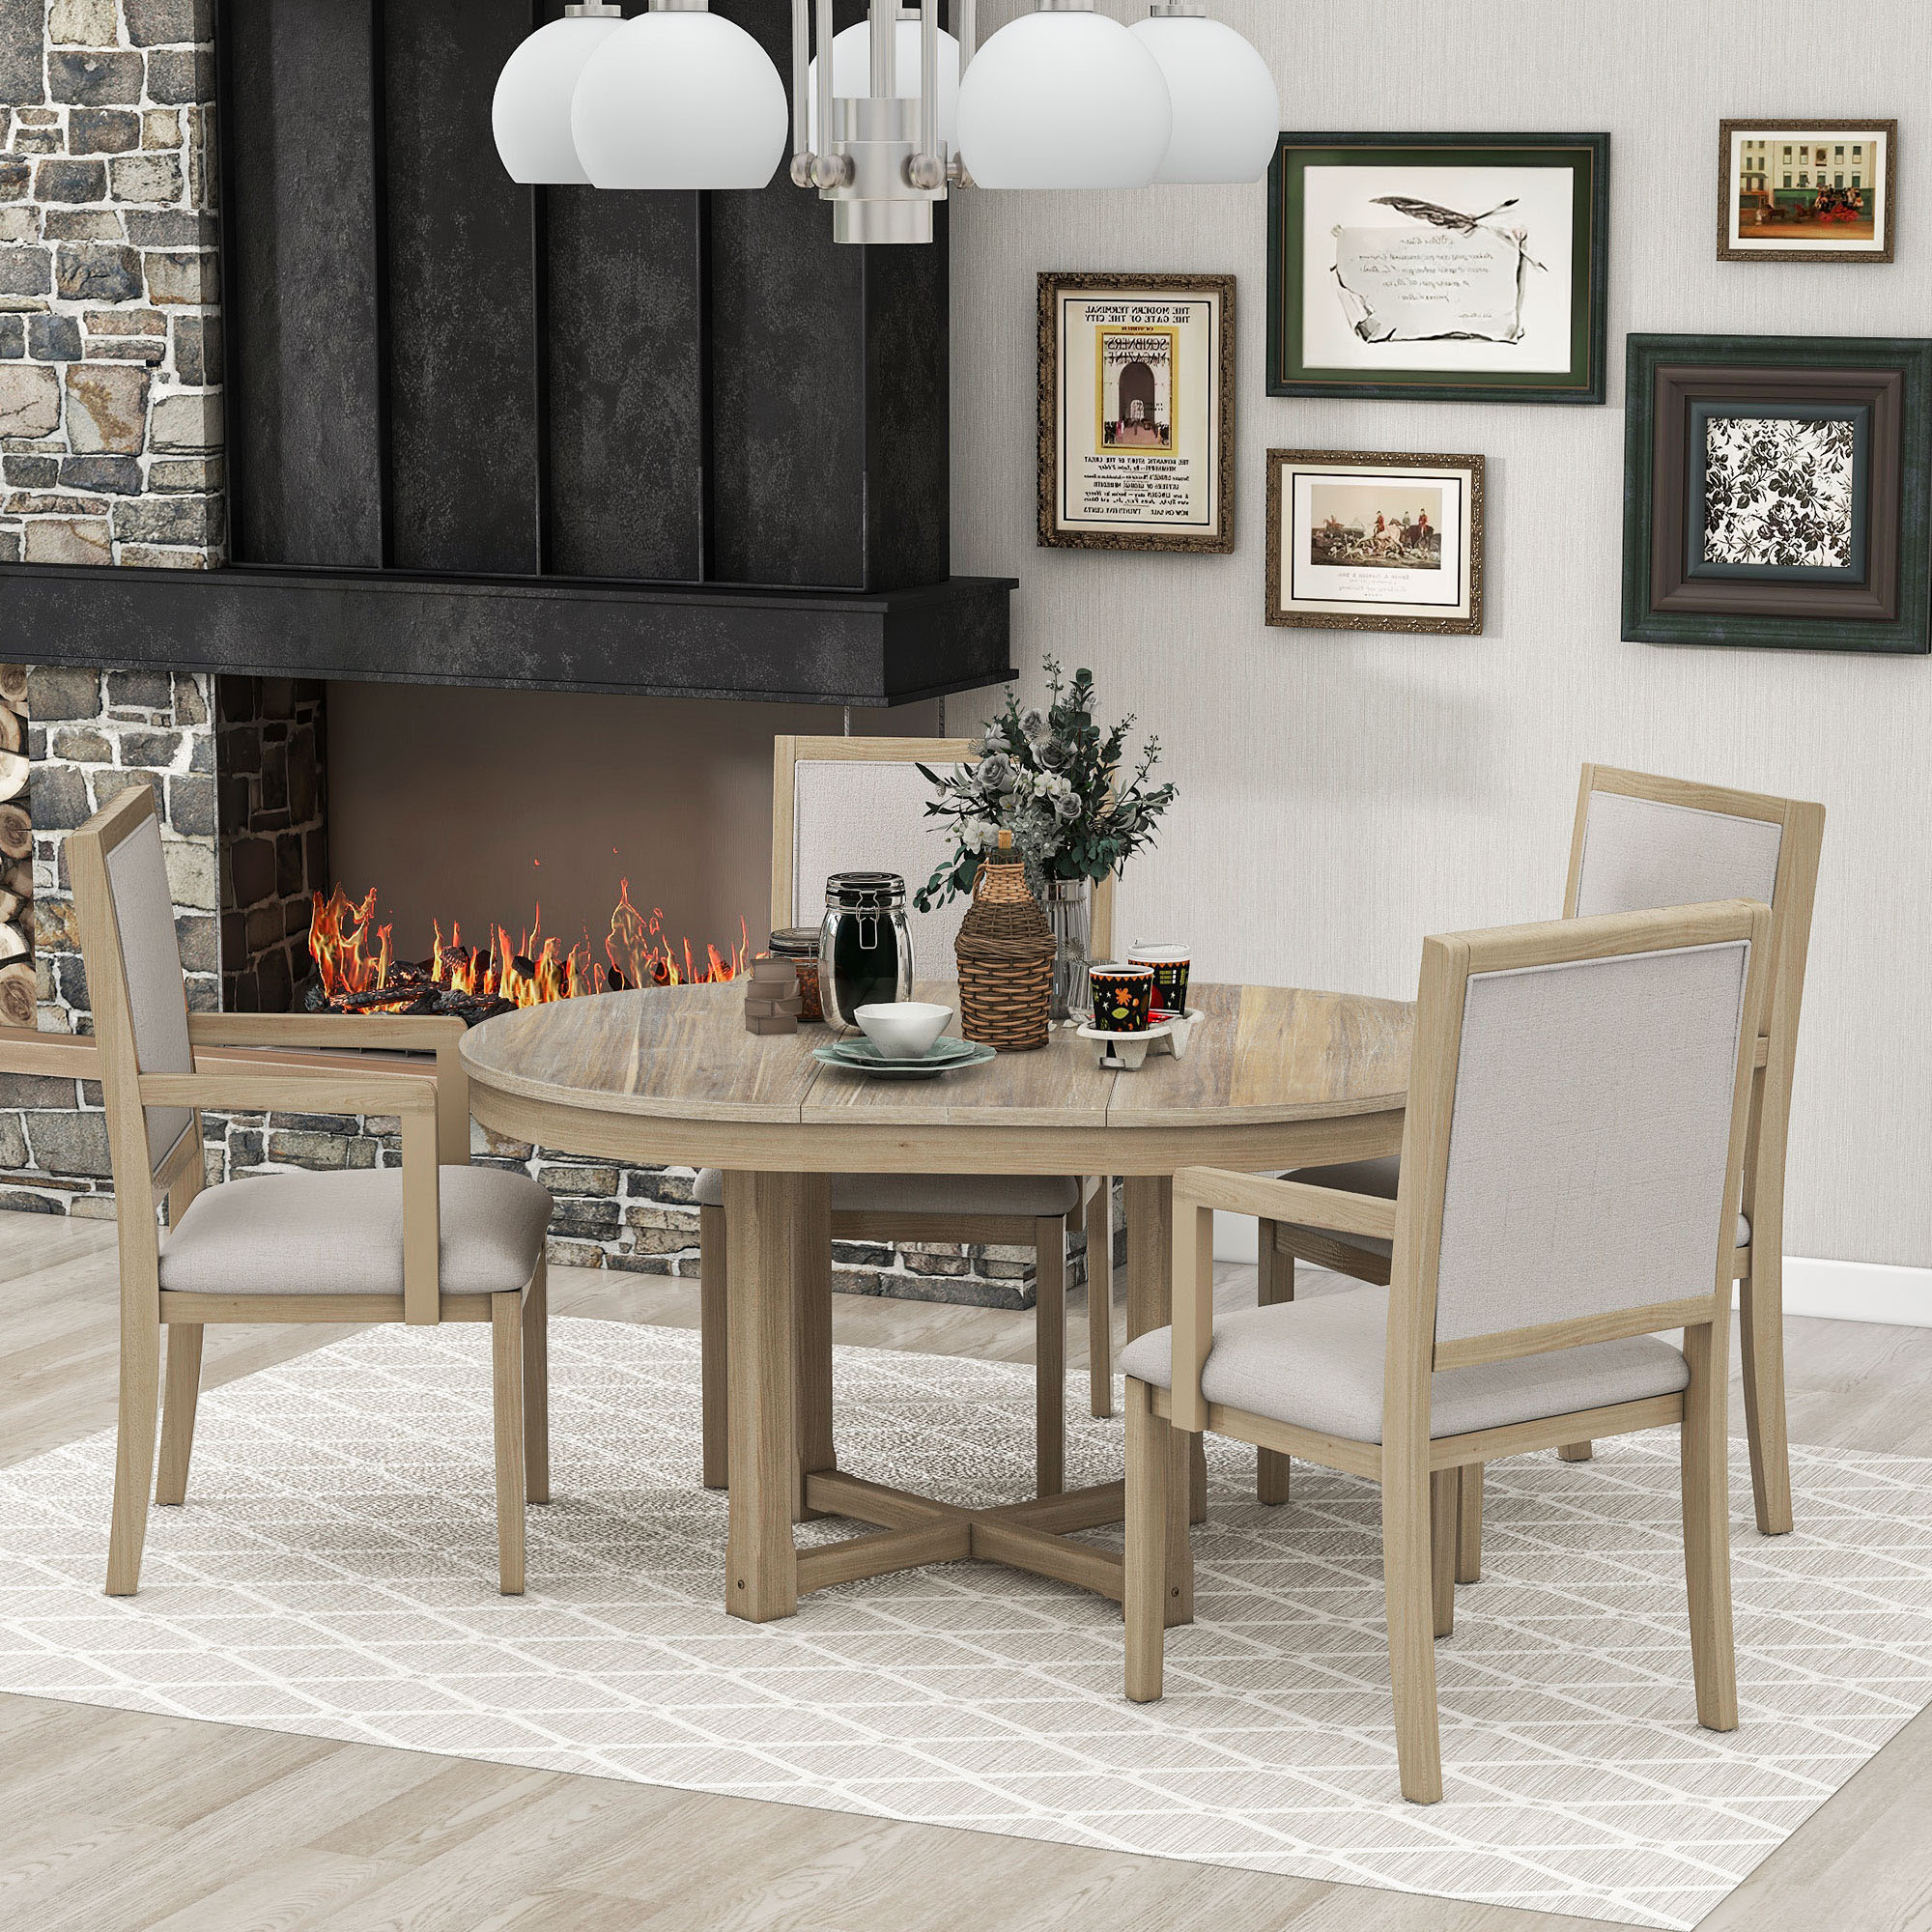 Clihome Natural Wood Wash Contemporary/Modern Dining Room Set with ...